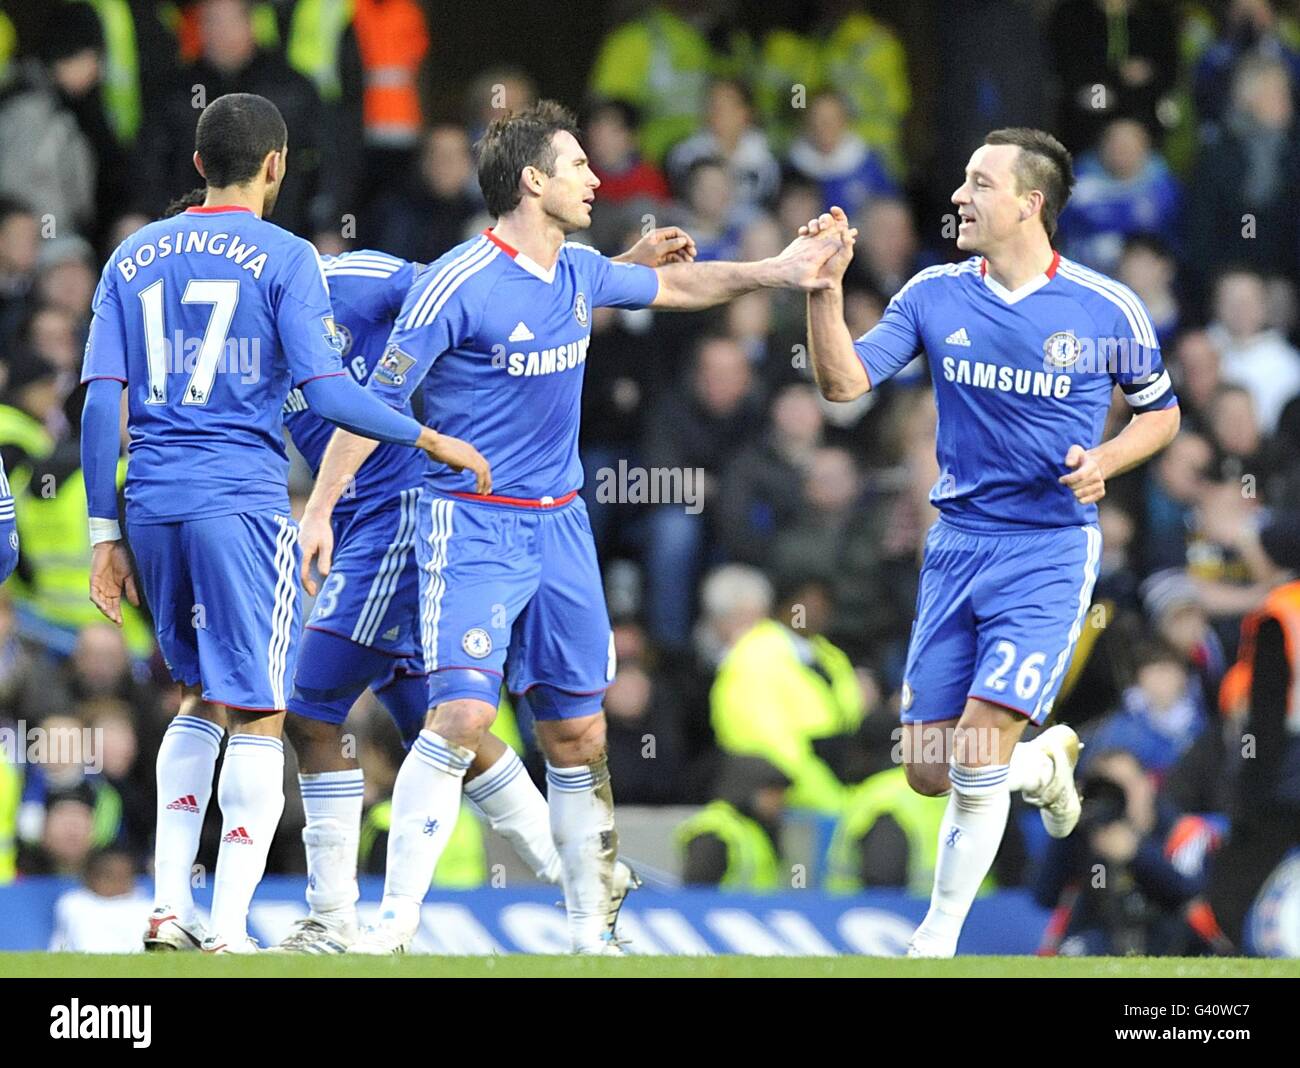 Chelsea captain John Terry (right) celebrates with his team-mates after Ipswich Town's Carlos Edwards scored an own goal to put them 3-0 up Stock Photo